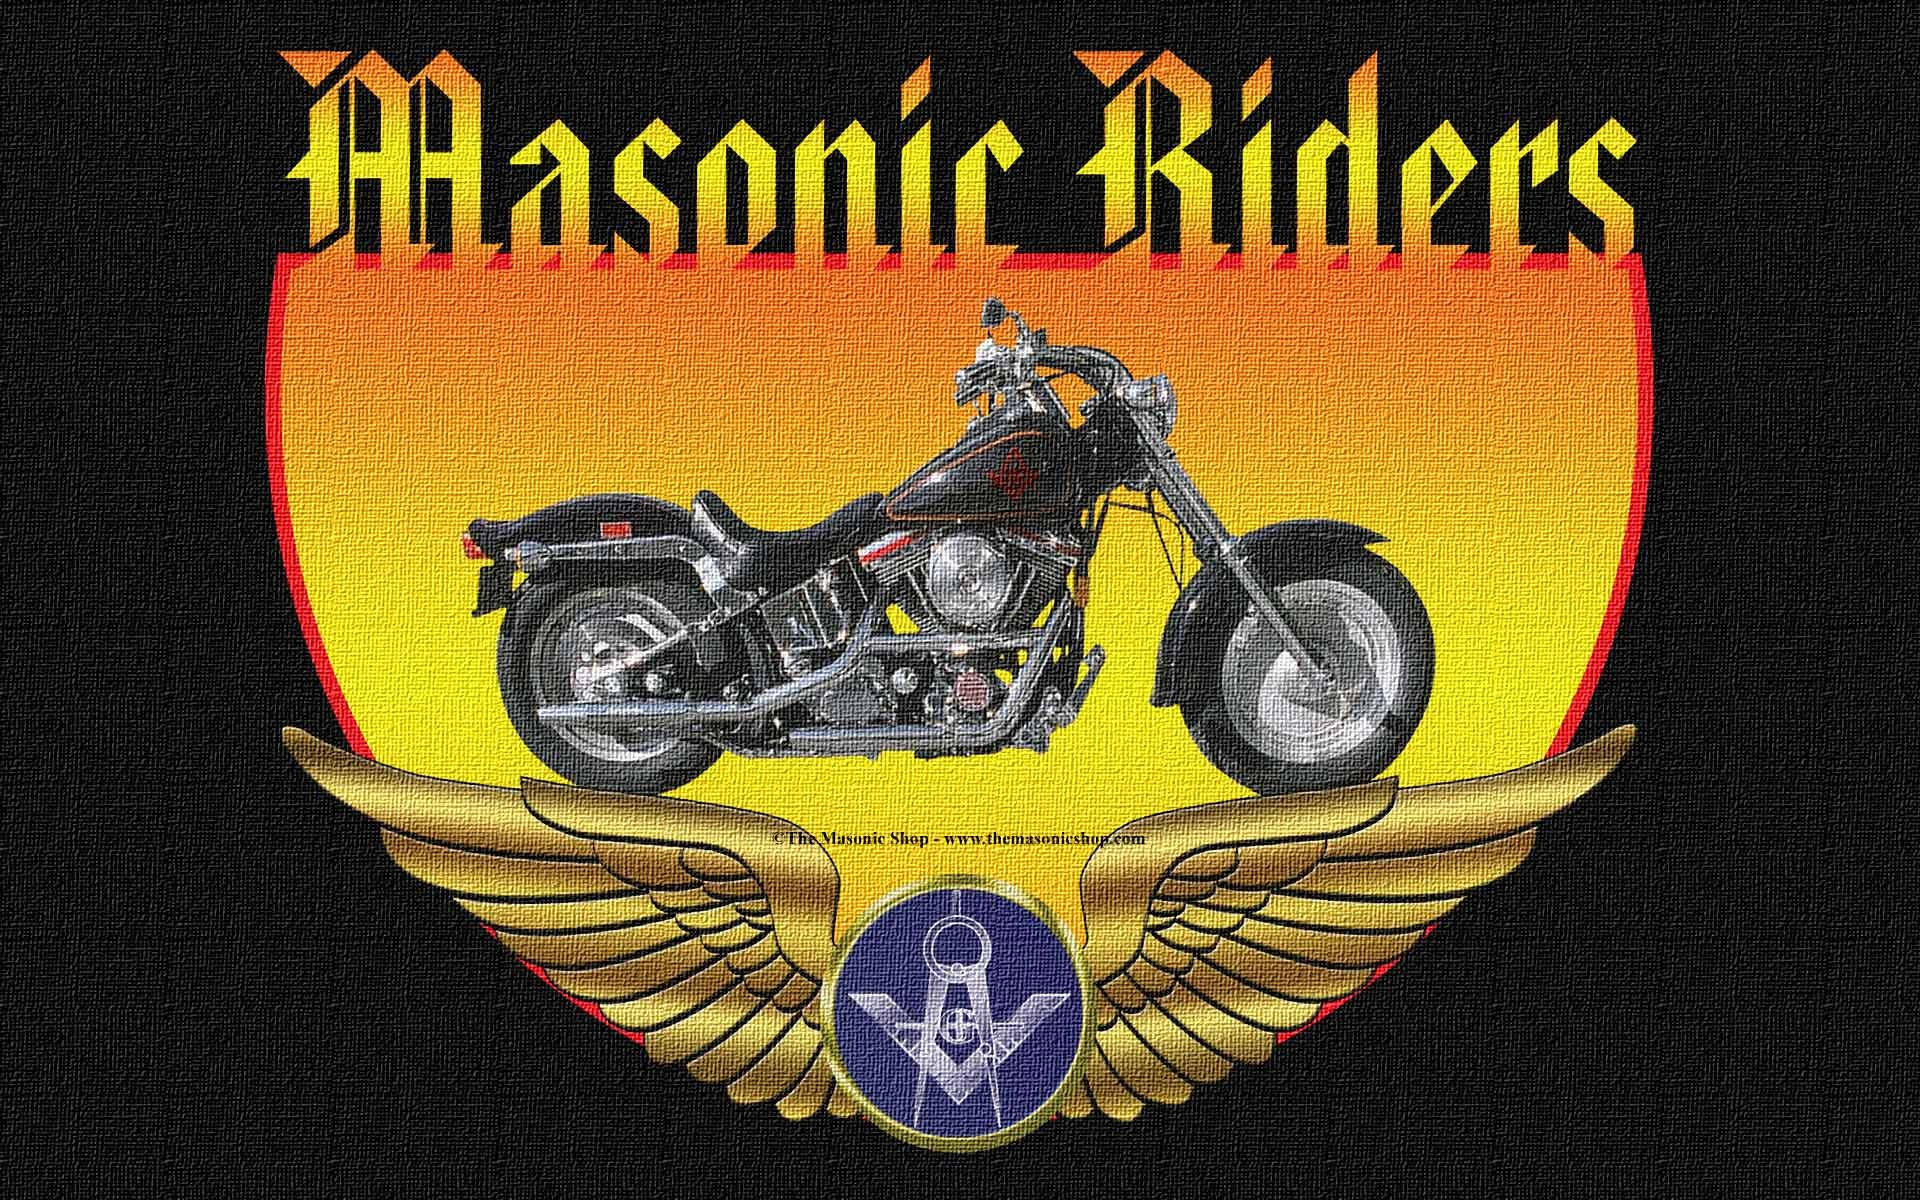 Masonic Riders With Black Motorcycle Wallpaper